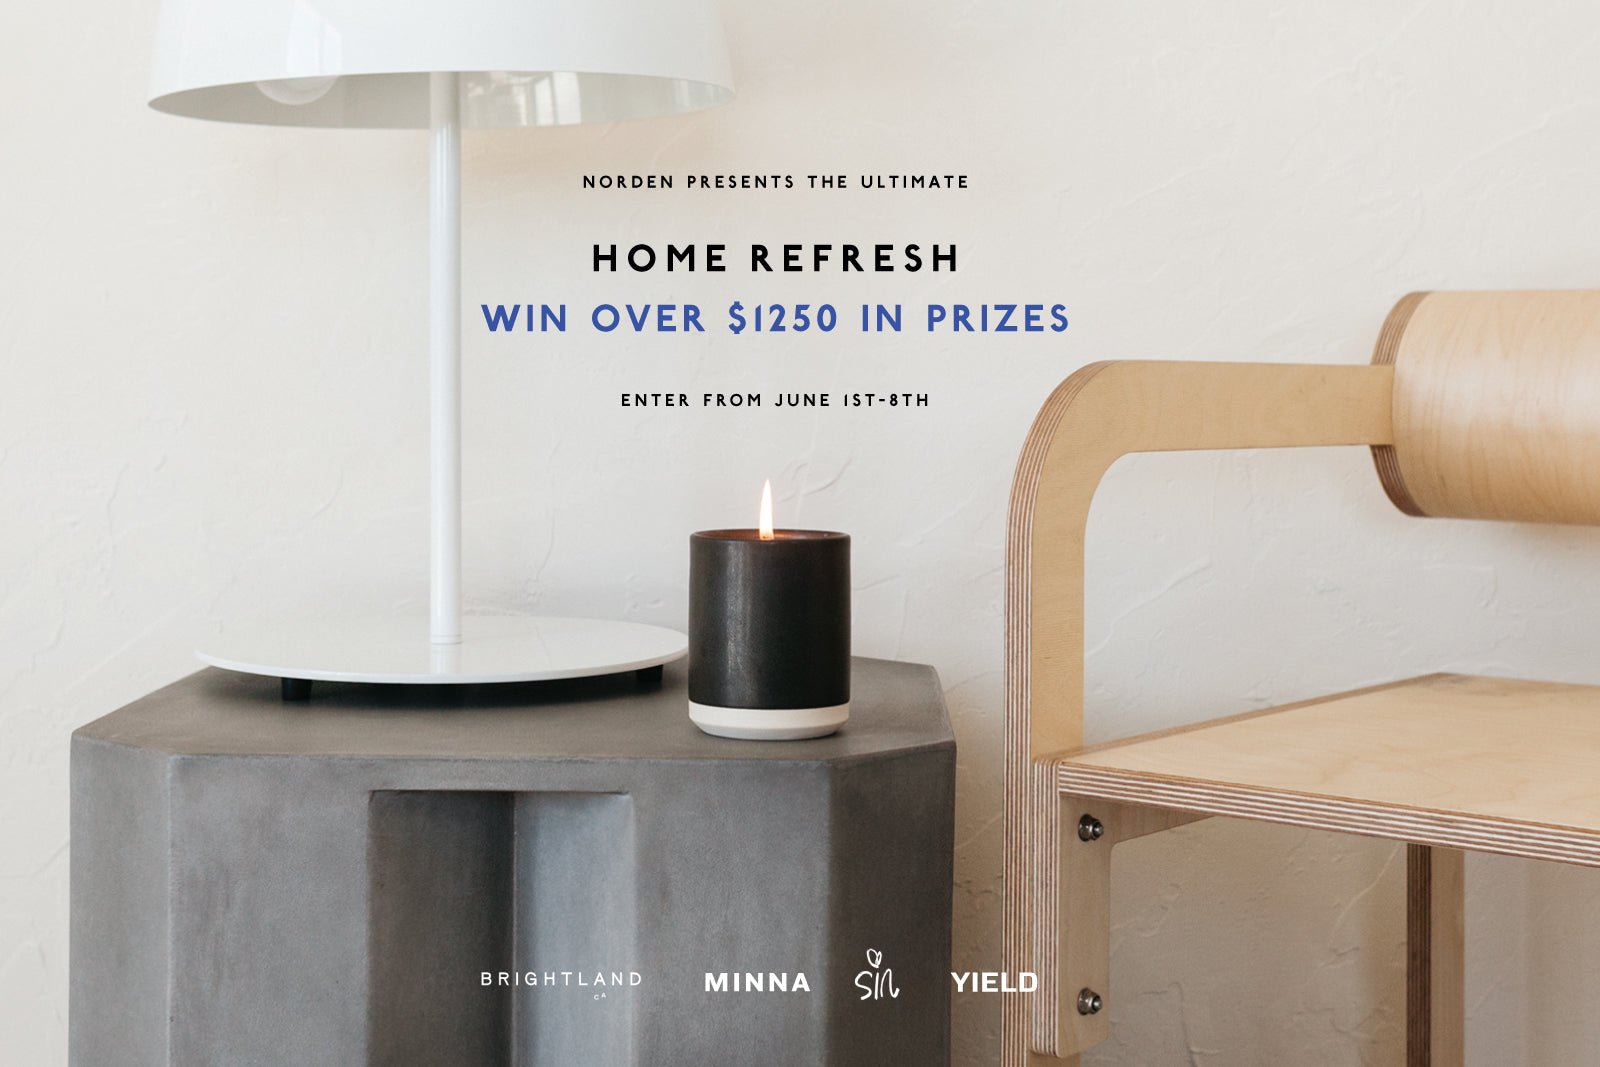 The Norden Spring Home Goods Giveaway